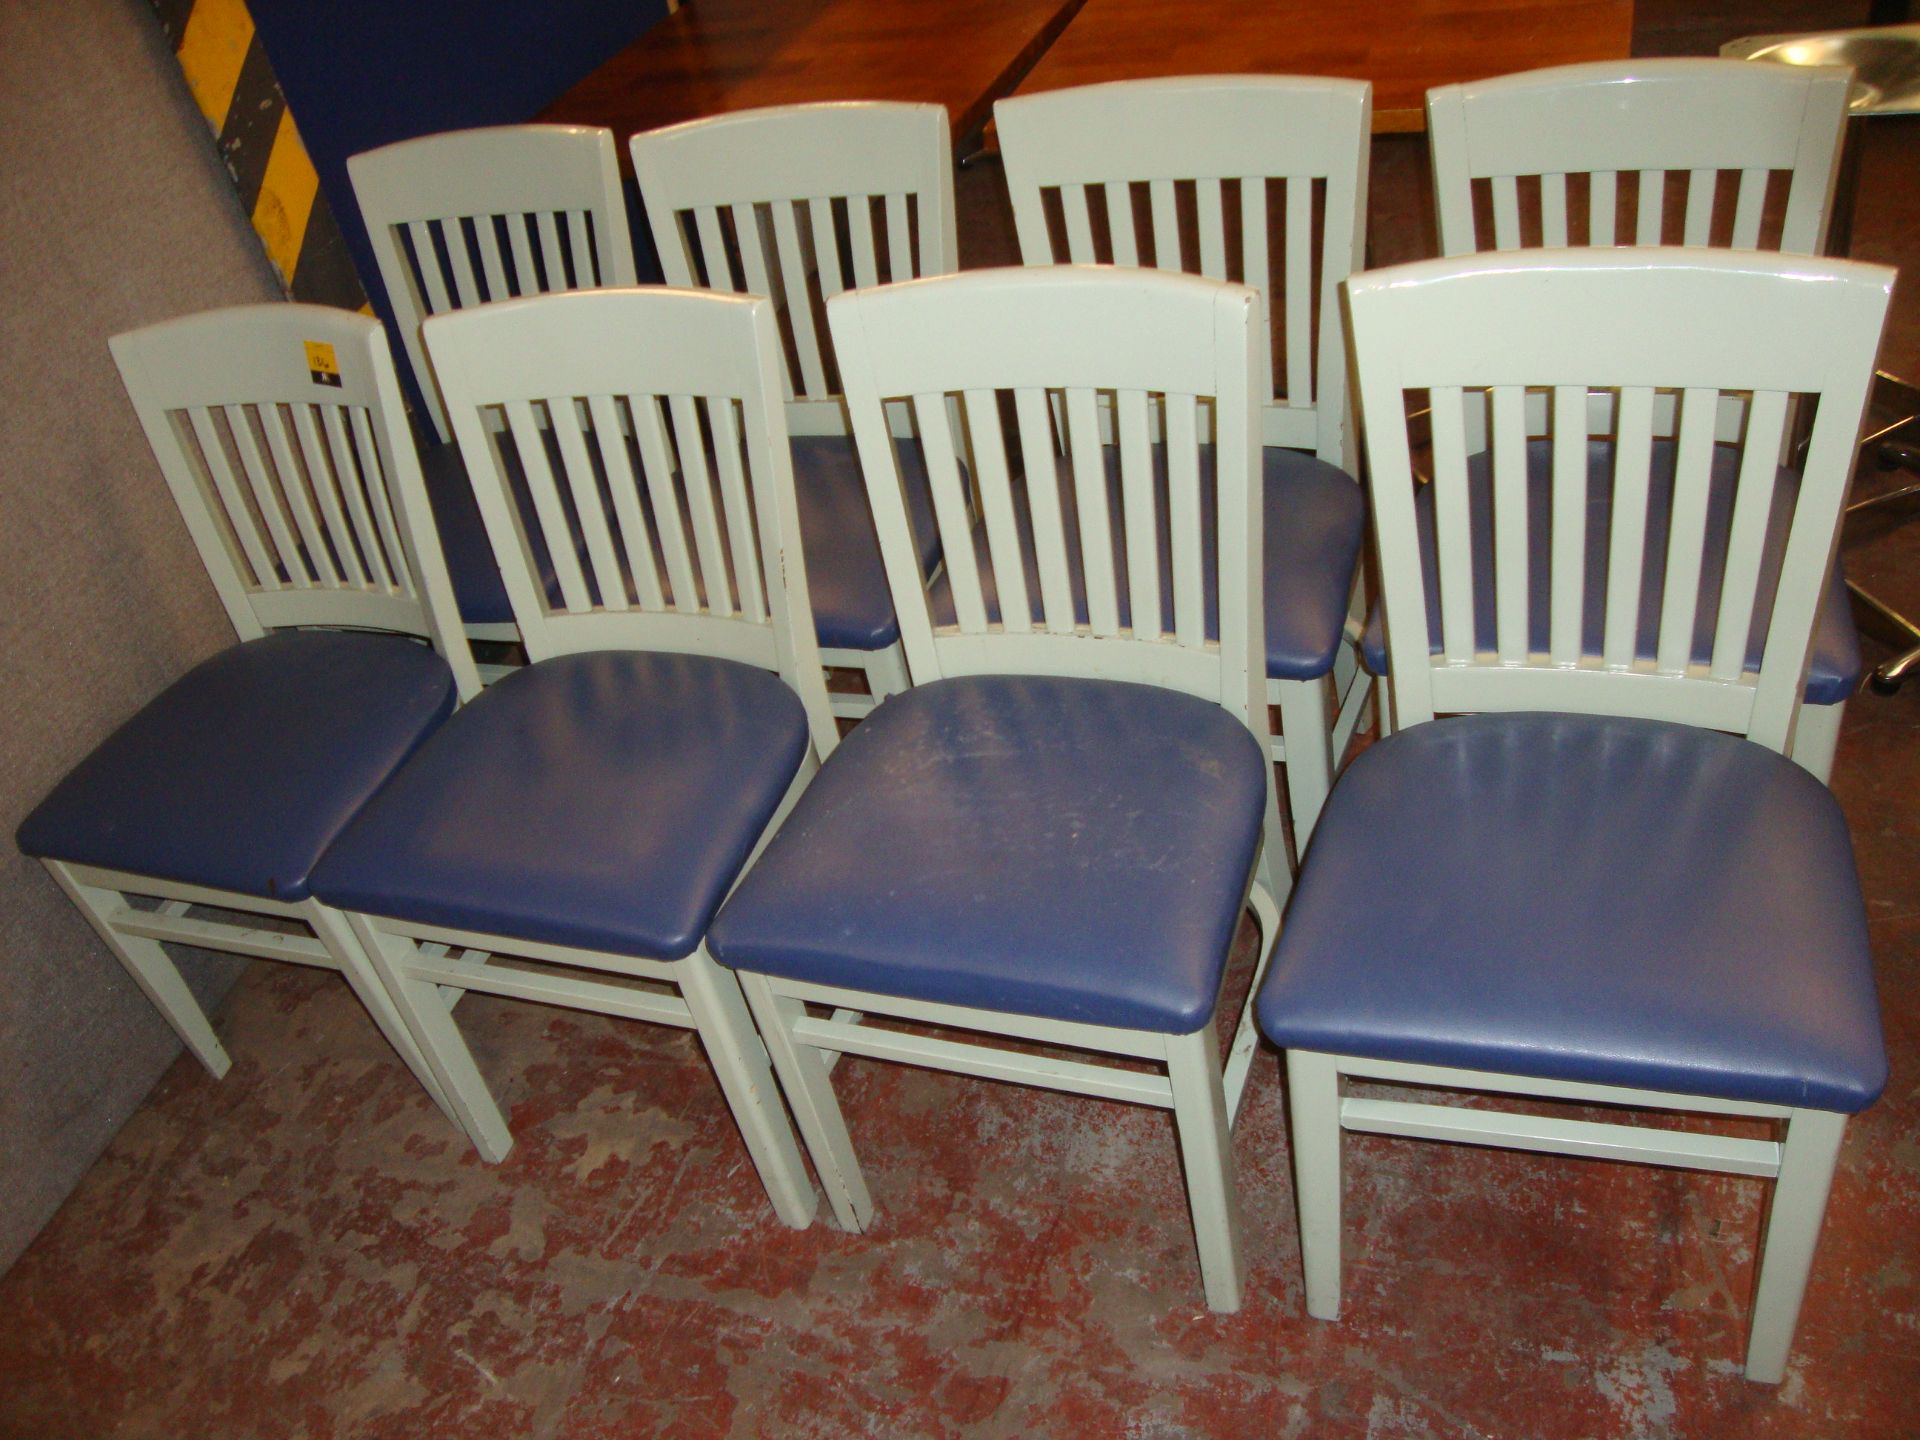 8 off pale green painted wooden chairs with blue upholstered seat bases. NB lots 131 - 137 consist - Image 3 of 3